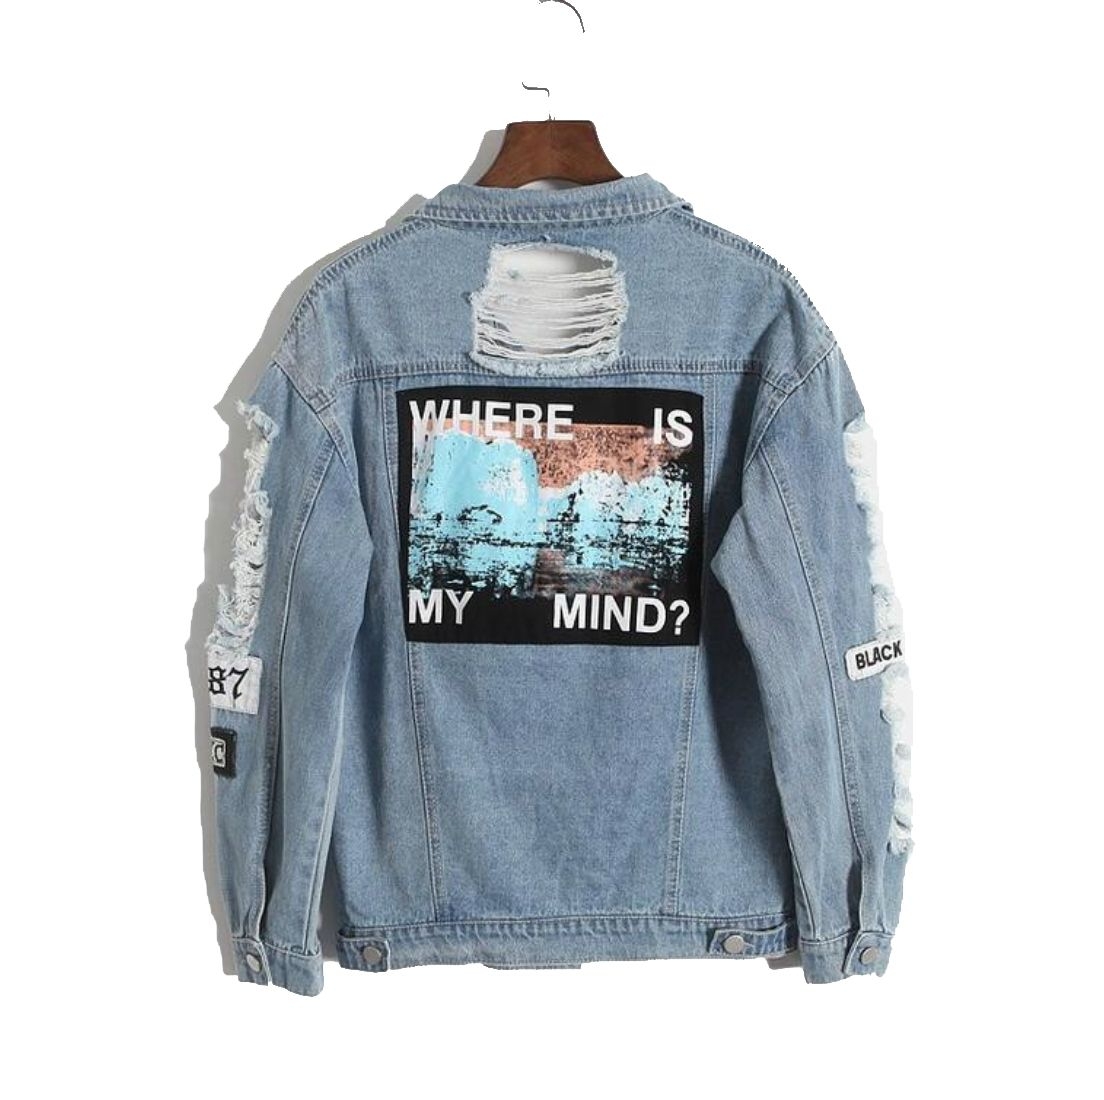 jean jacket with patches women's